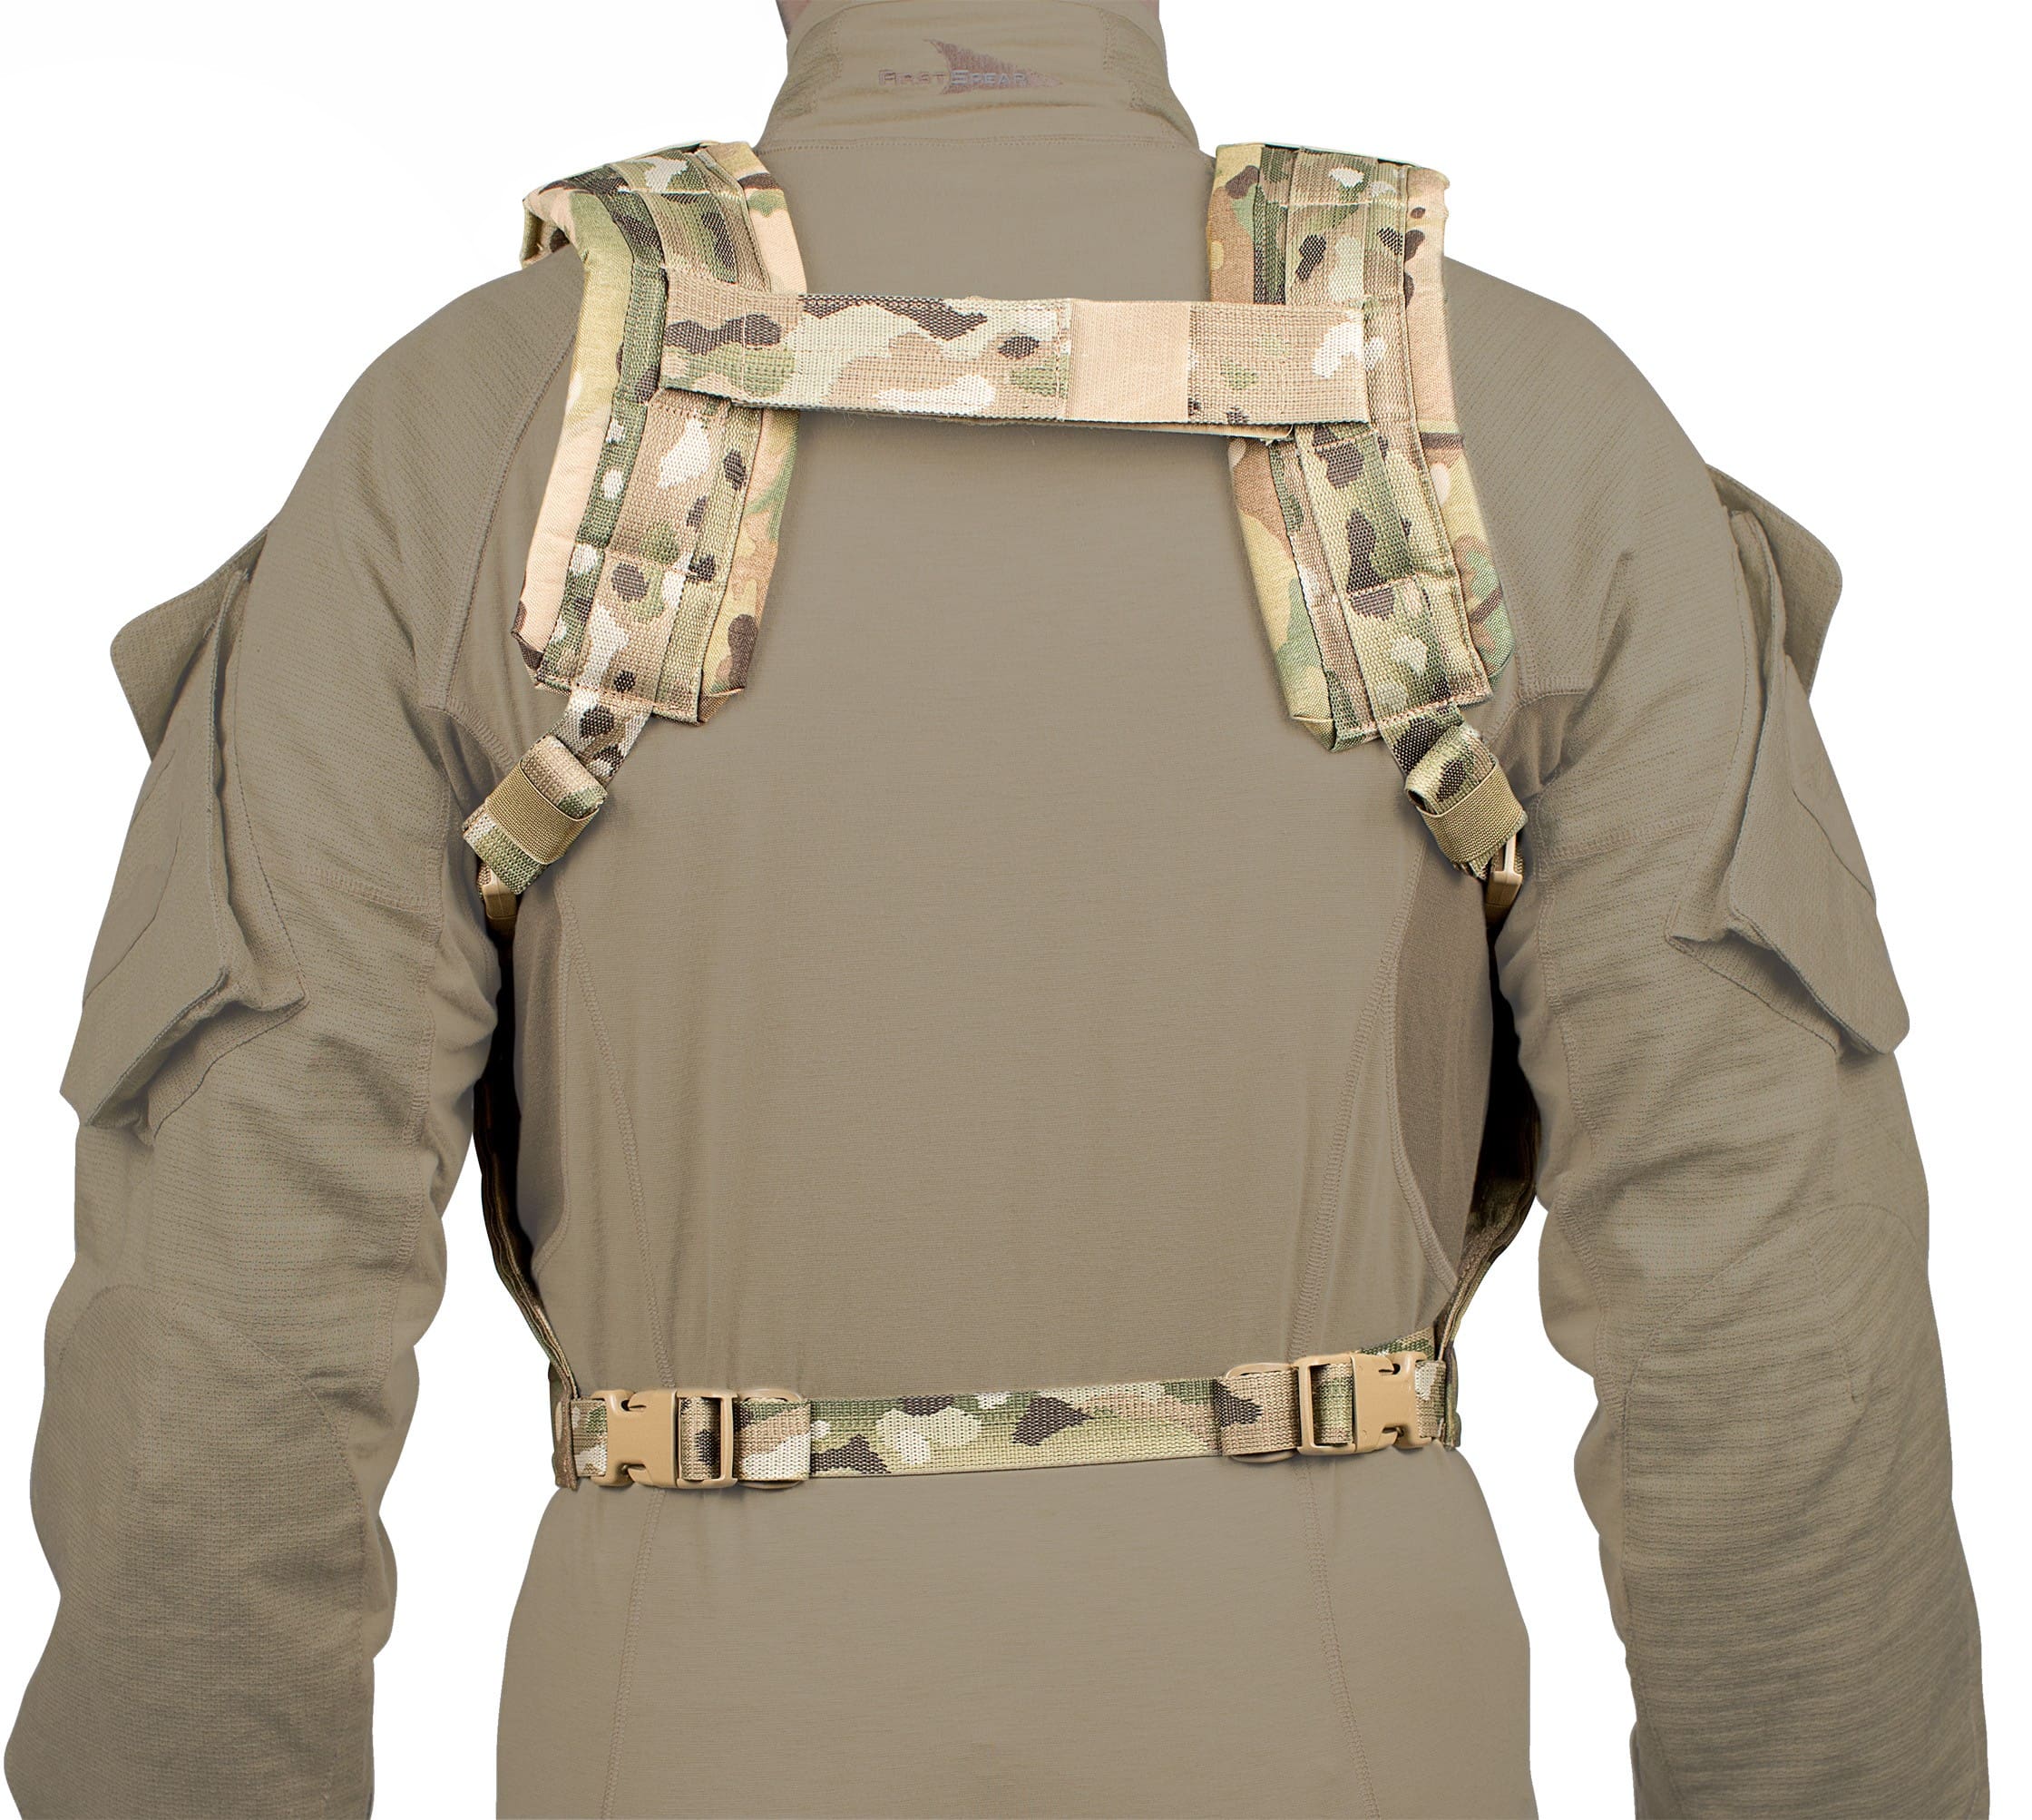 FirstSpear Friday Focus - Padded Split Front Recce Rig, 6/12 | Soldier ...